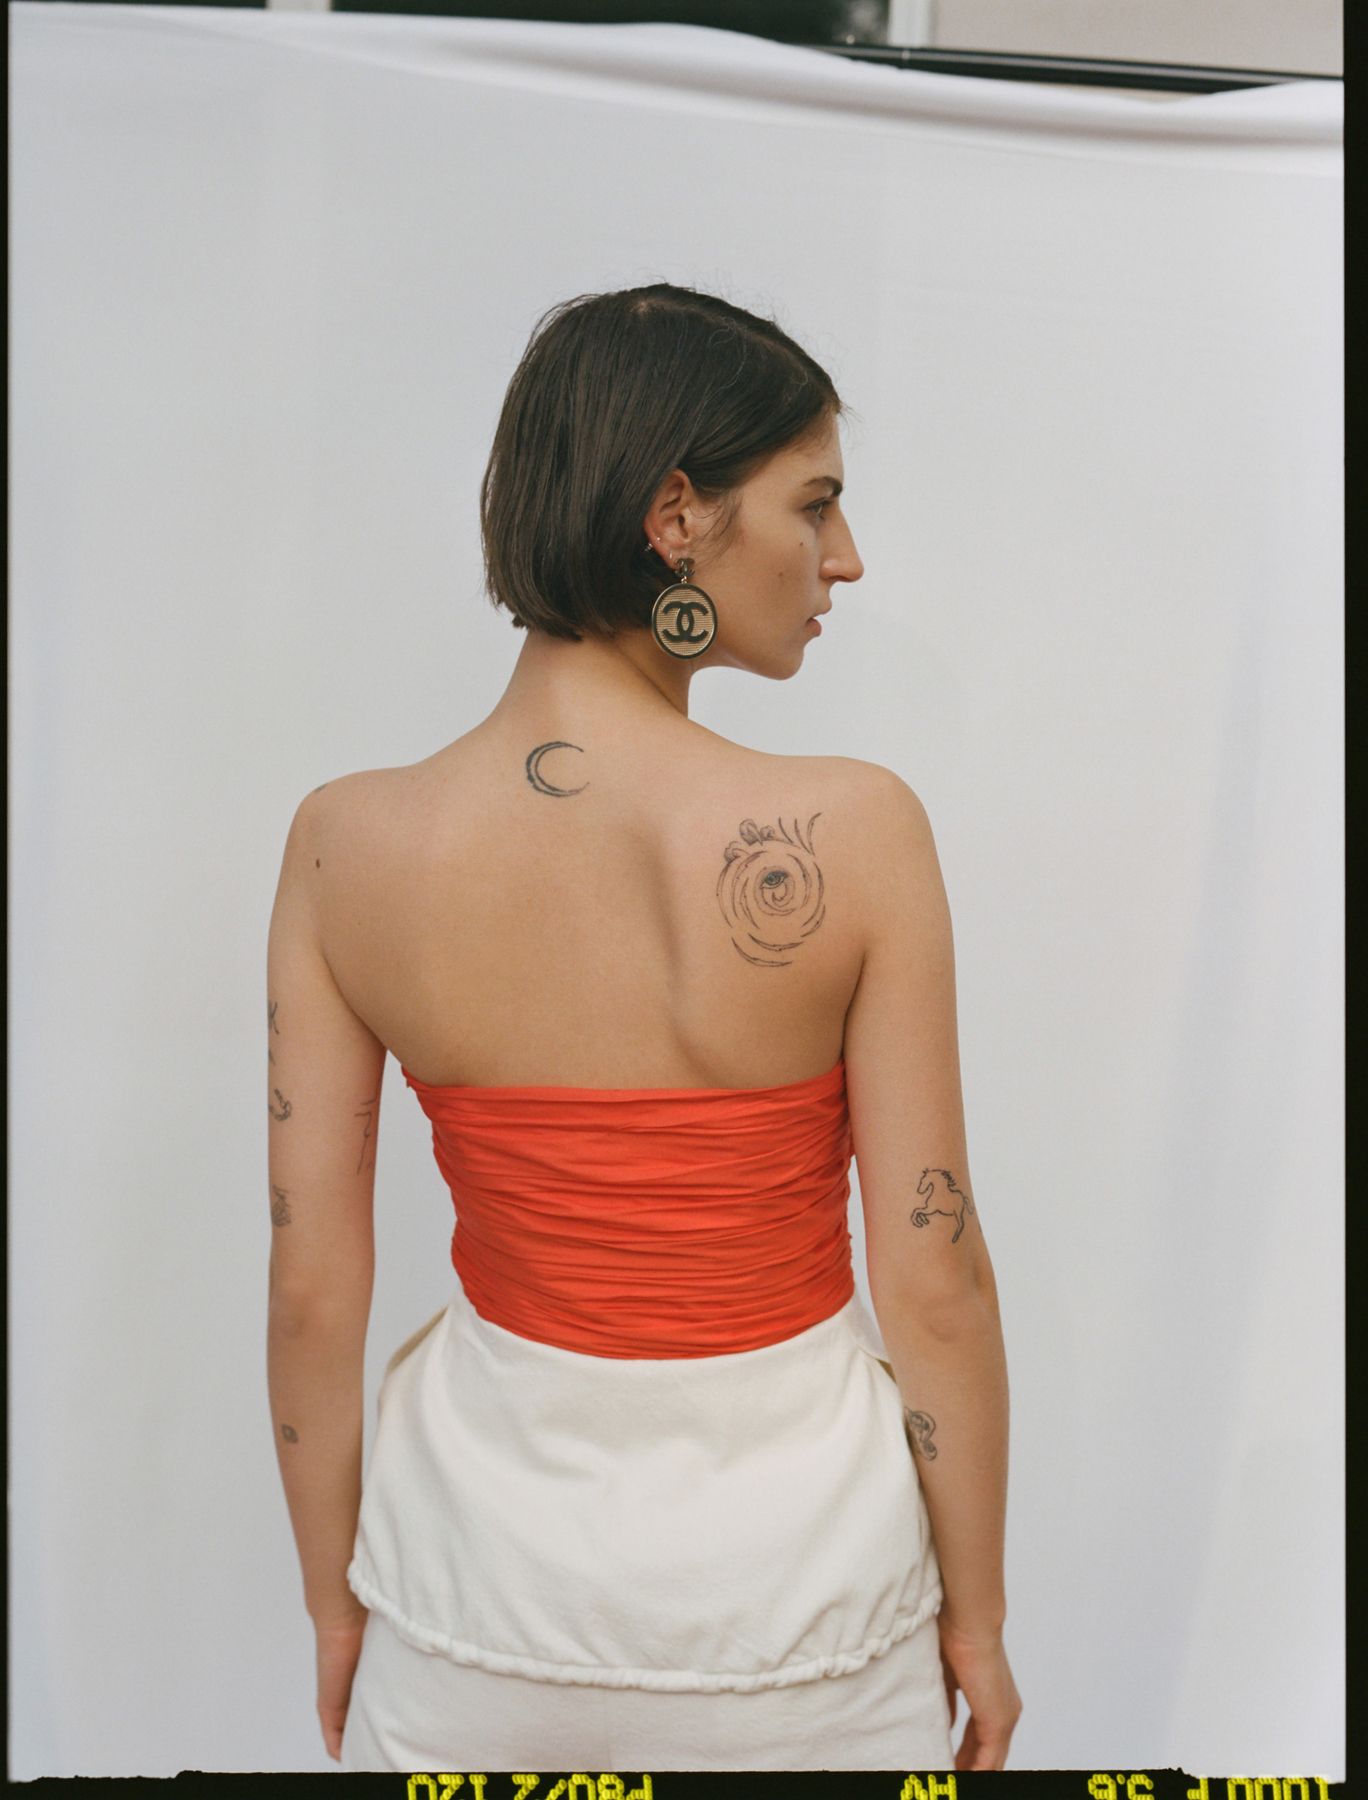 A/B) Unaffected tattoos performed 10 years prior to presentation. |  Download Scientific Diagram